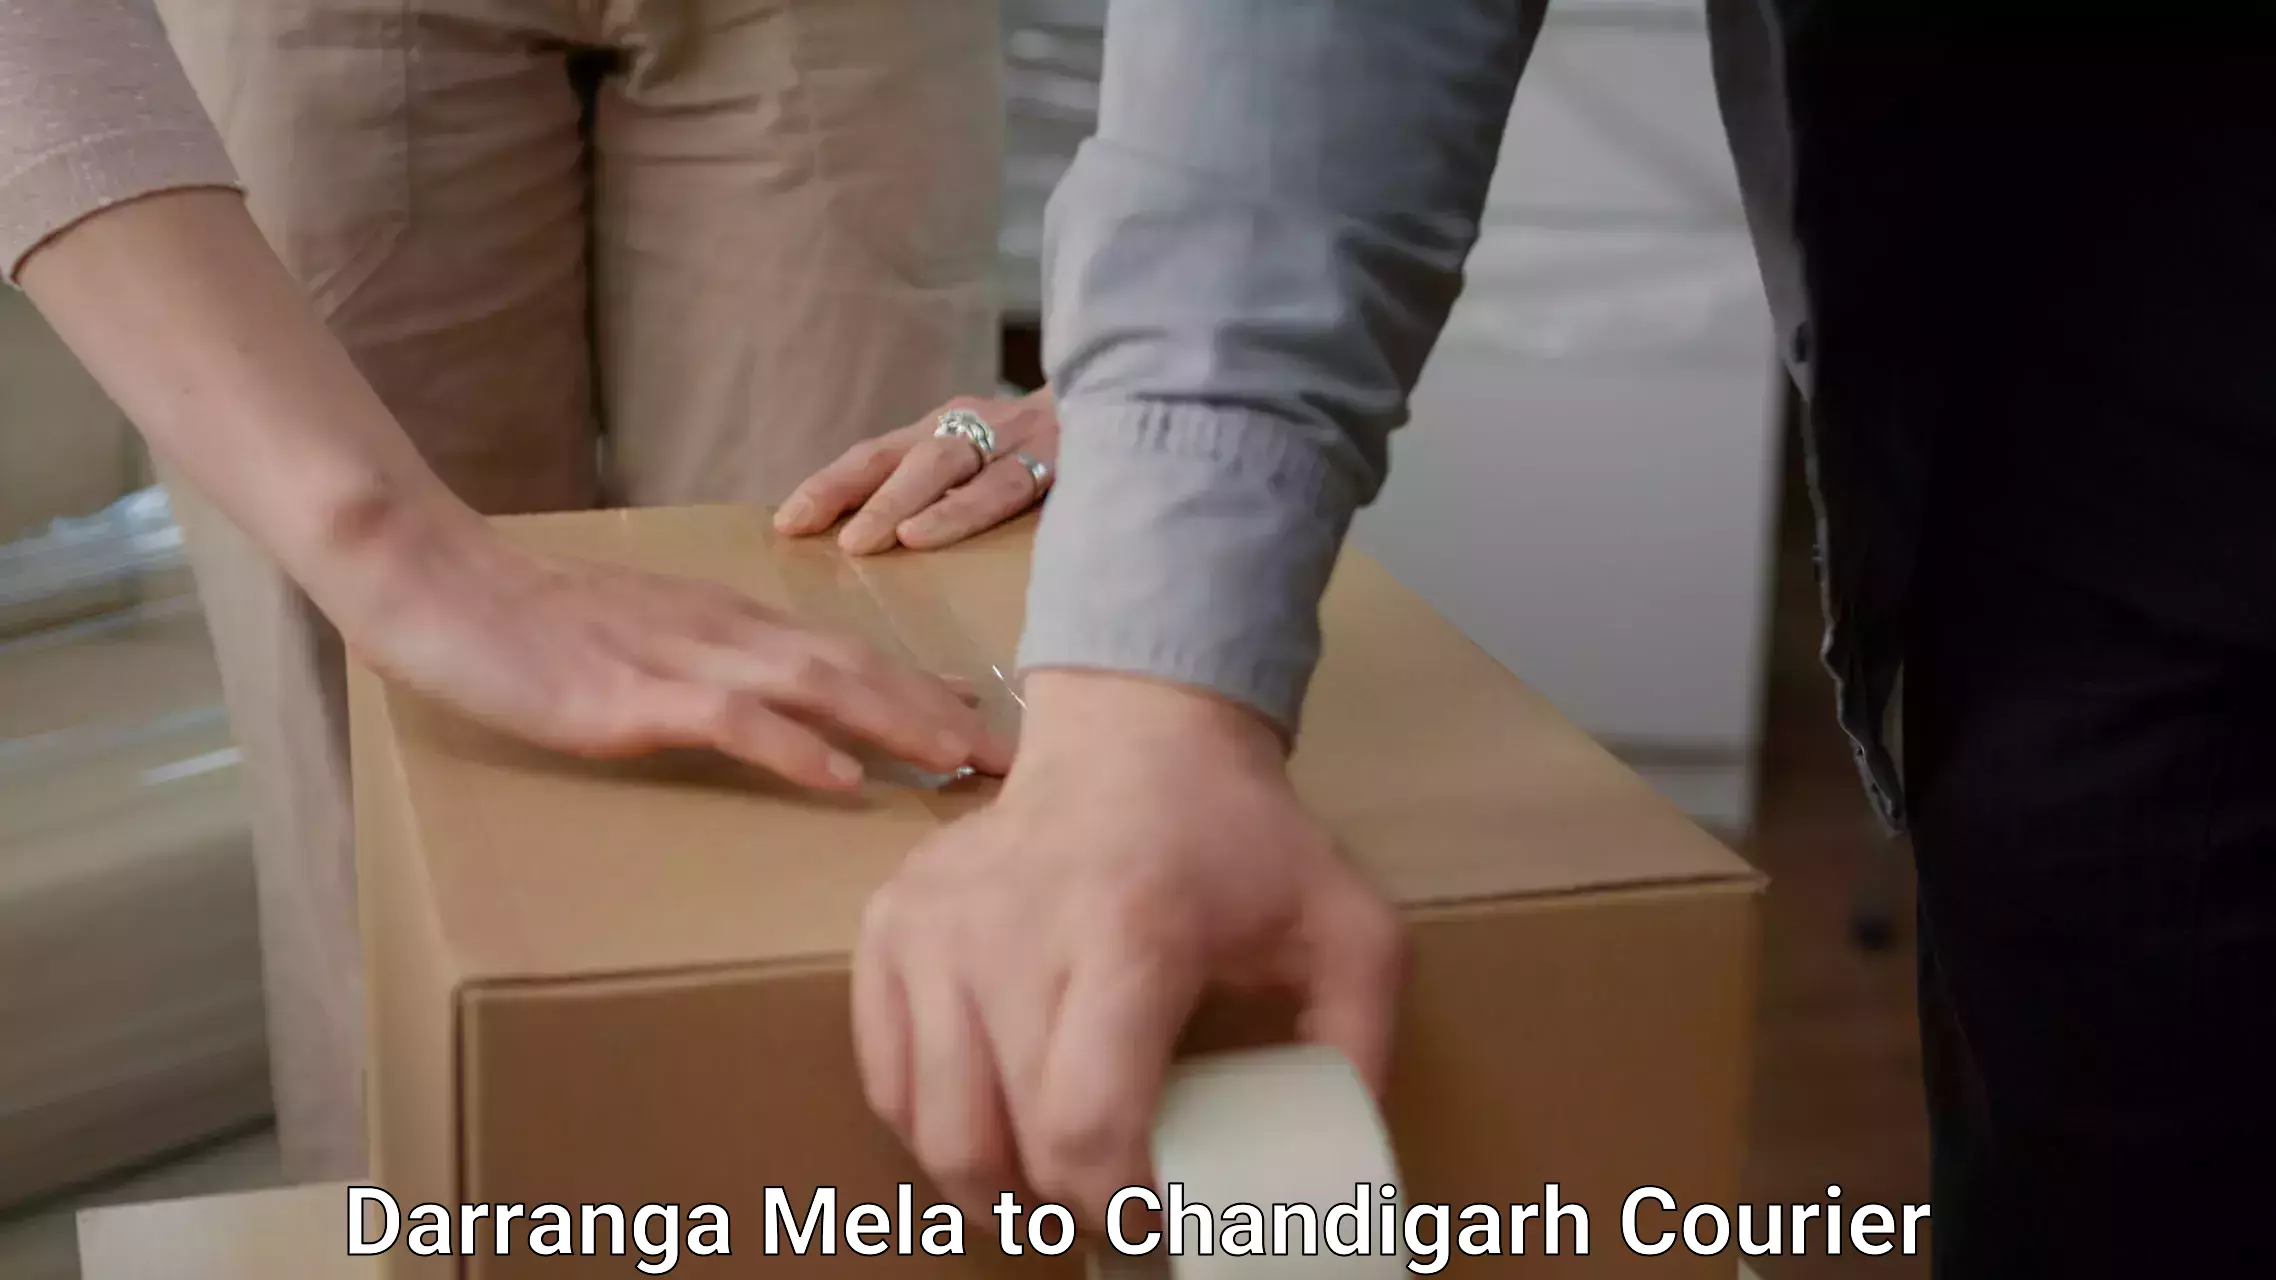 Reliable furniture movers in Darranga Mela to Chandigarh